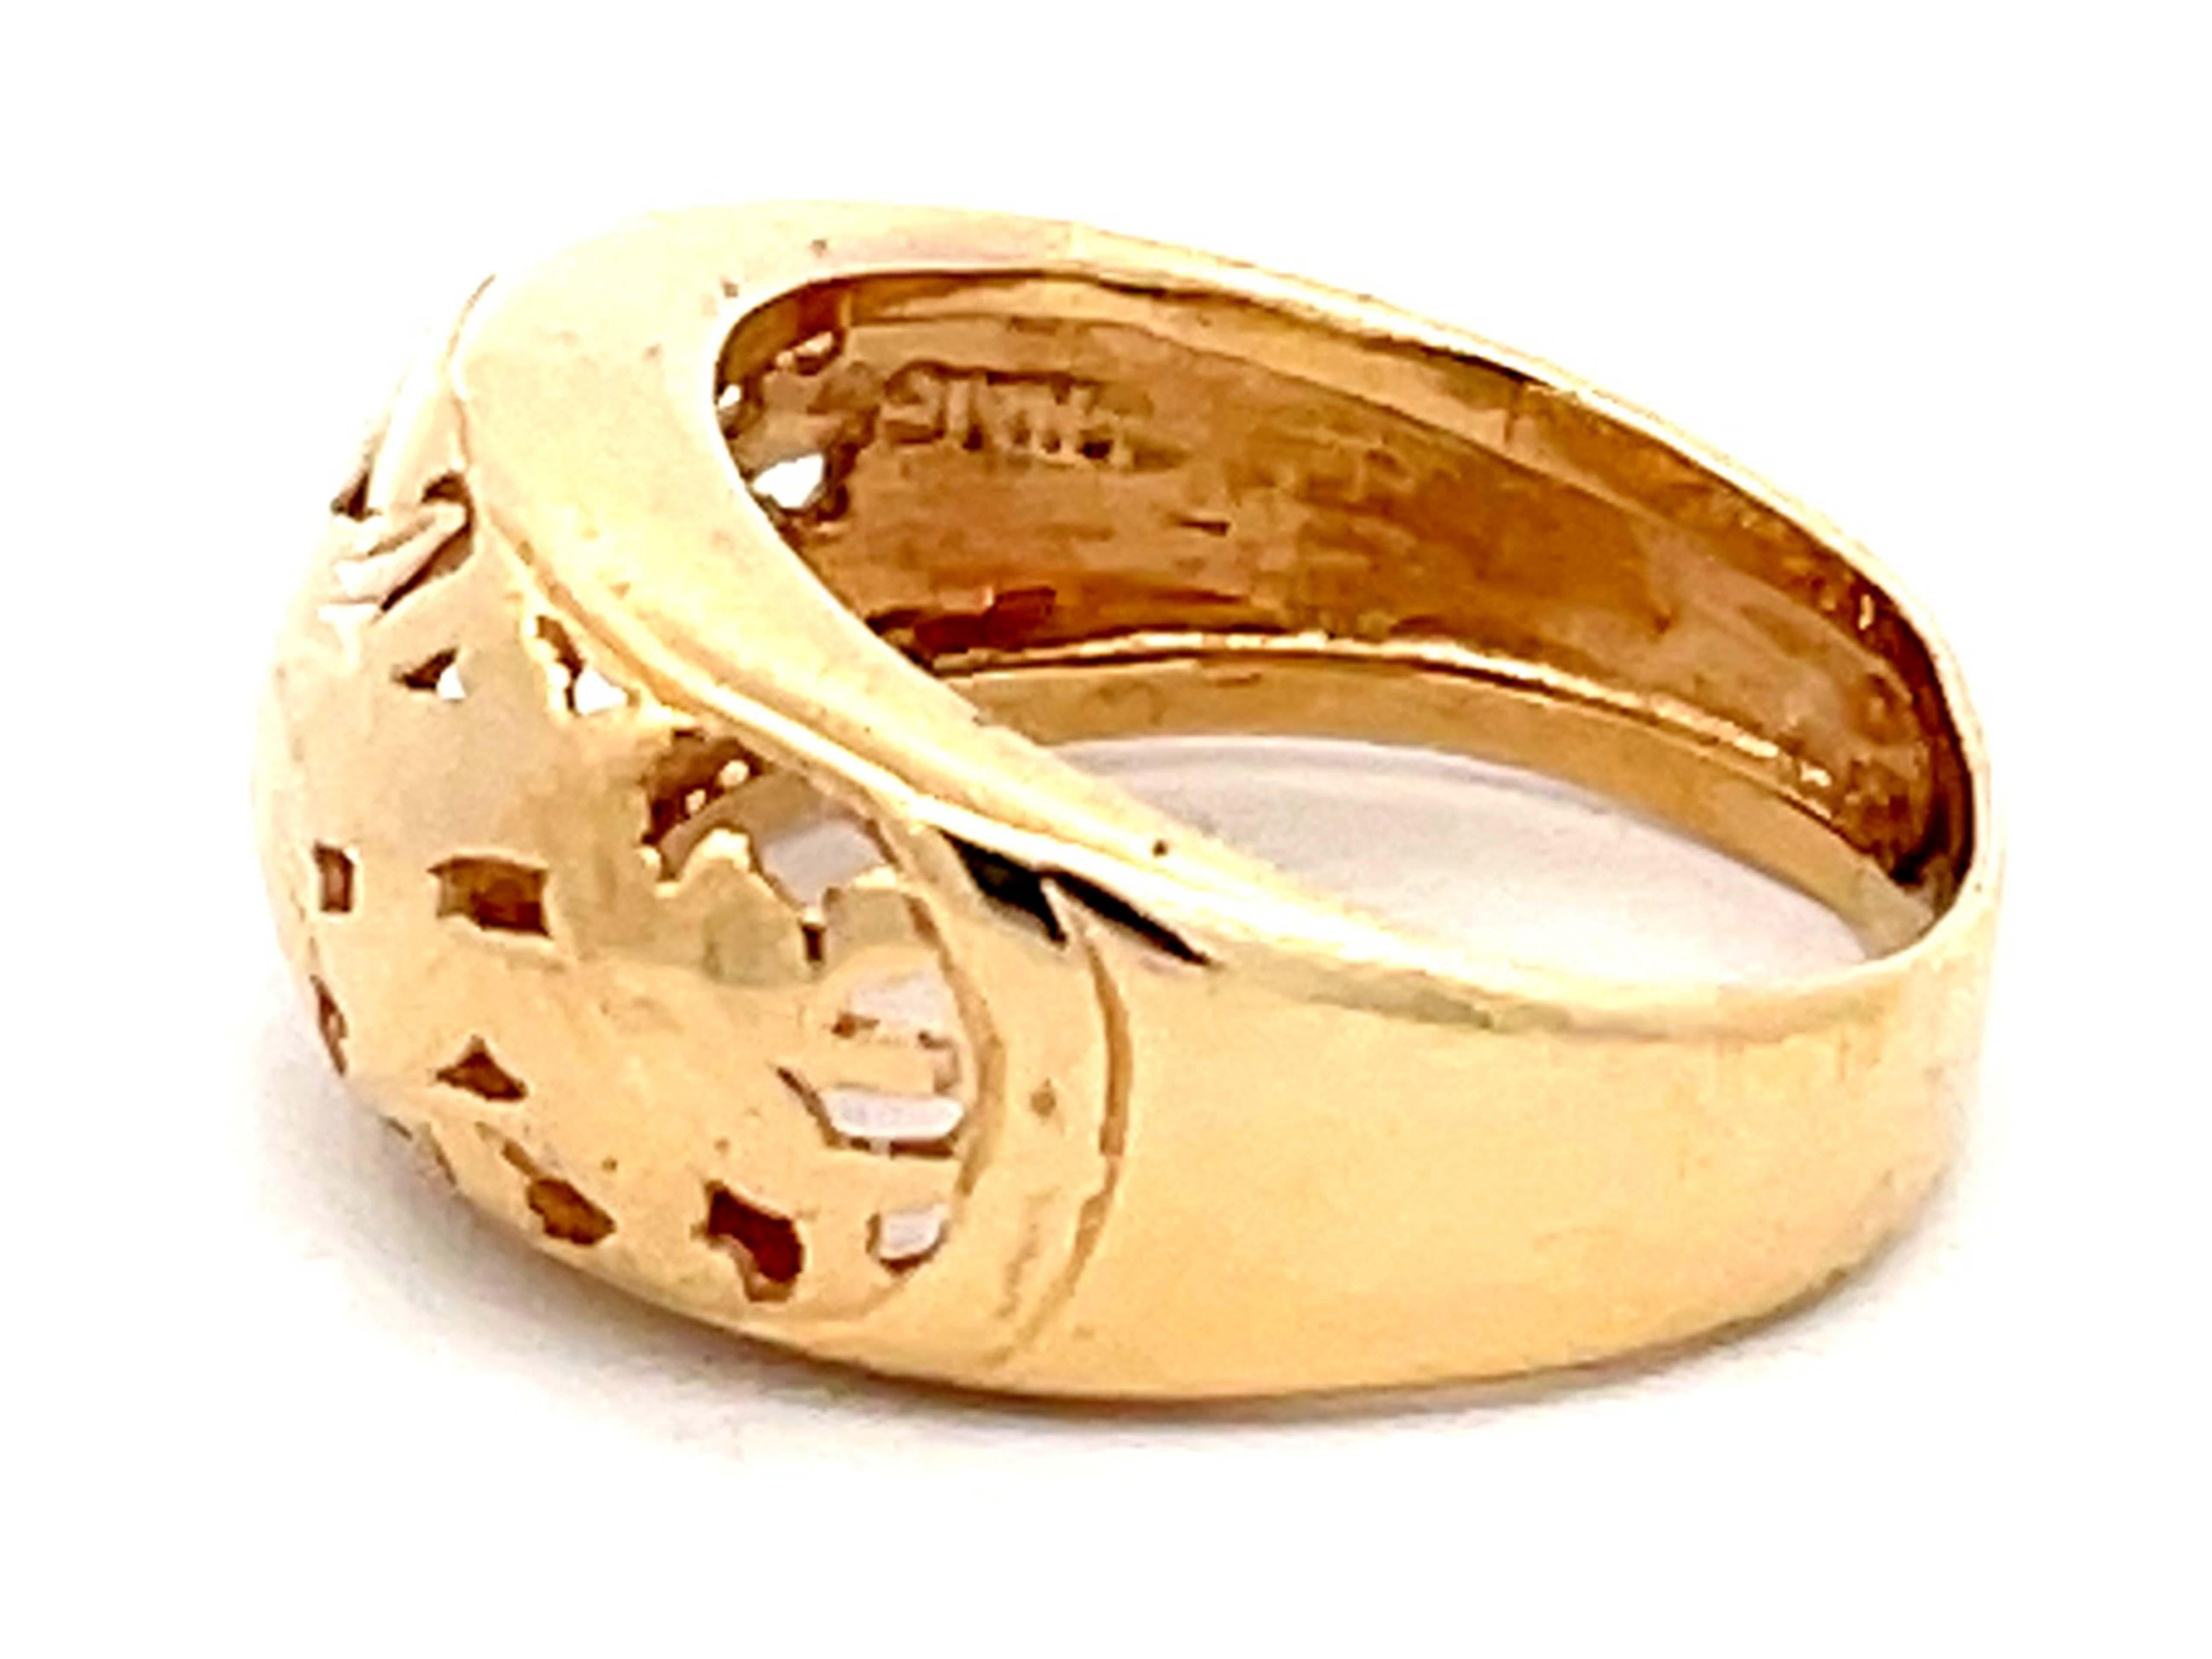 Mings Bird on a Plum Gold Cutout Dome Band Ring in 14k In Excellent Condition For Sale In Honolulu, HI